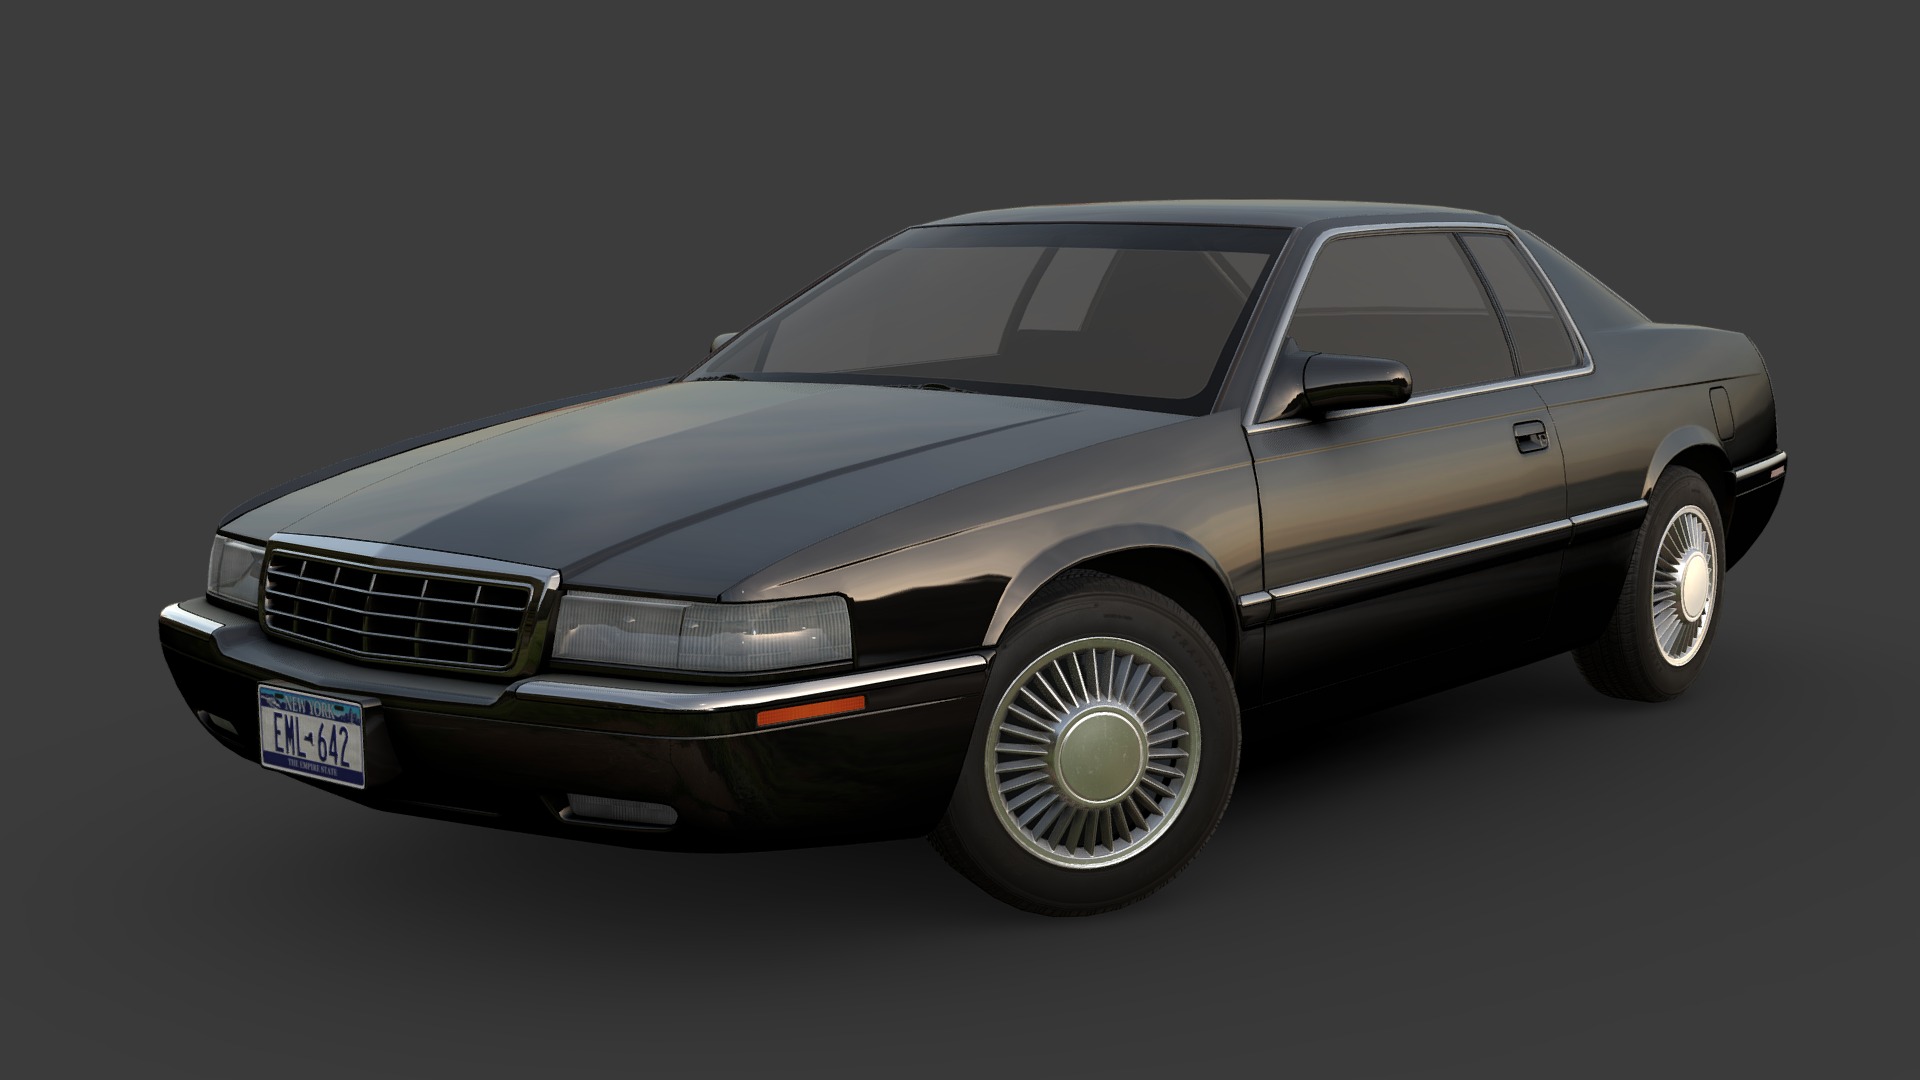 3D model Cadillac Eldorado 1999 - This is a 3D model of the Cadillac Eldorado 1999. The 3D model is about a silver car with a black background.